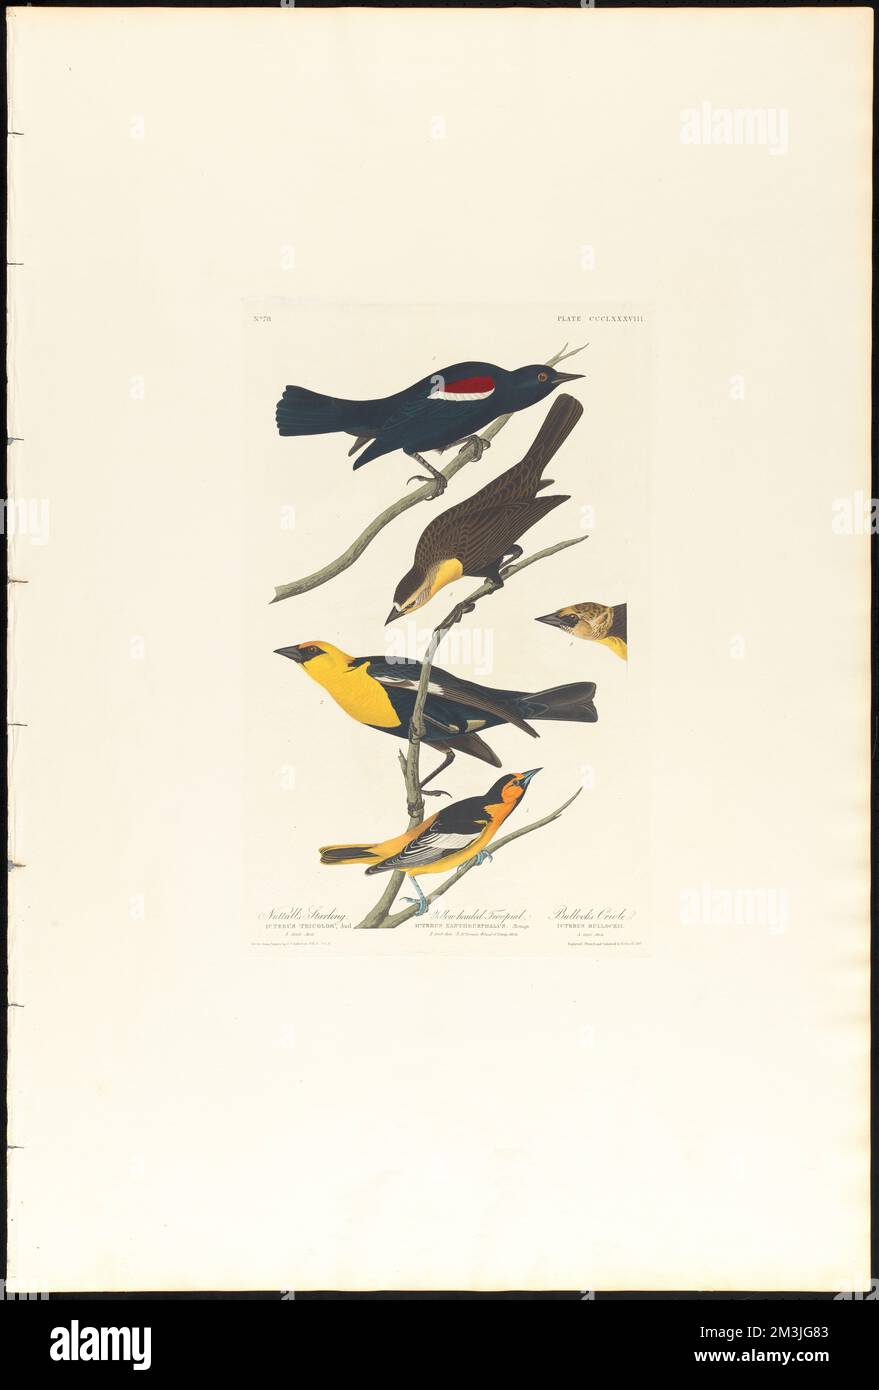 Nuttall's starling. Yellow-headed troopial. Bullock's oriole : Icterus tricolor, Aud. 1. Adult male. Icterus xanthocephalus, Bonap. 2. Adult male. 3. Do. Female. 4. Head of young male. Icterus bullockii. 5. Adult male. c.1 v.4 plate 388 , Birds, Northern oriole, Tricolored blackbird, Yellow-headed blackbird. The Birds of America- From Original Drawings by John James Audubon Stock Photo